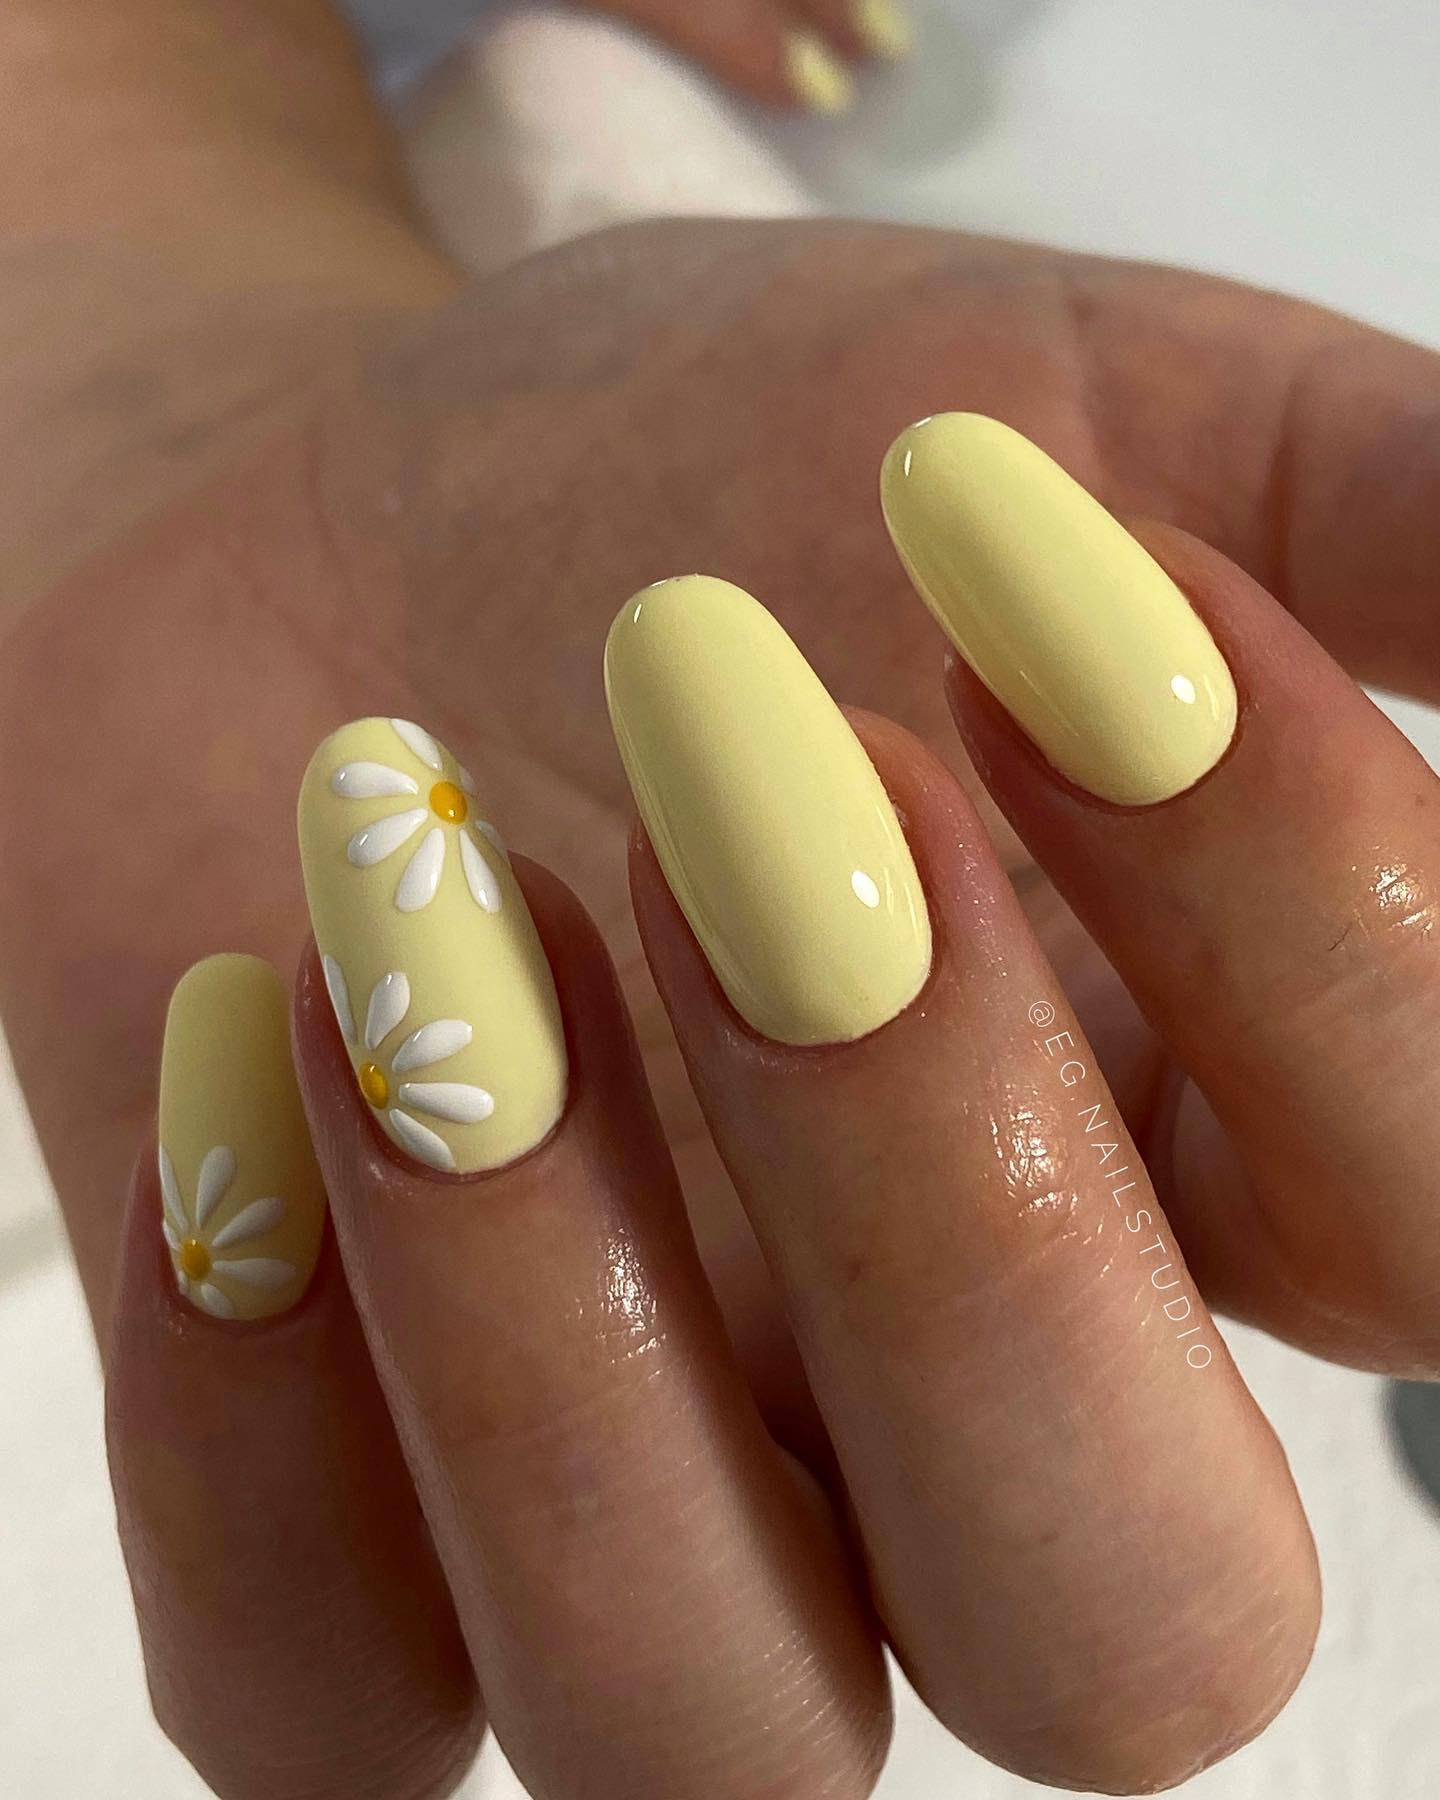 If bright and shiny yellow nail polish is not for you, why don't you try pastel yellow? To make it more positive, you can draw cute daisies.